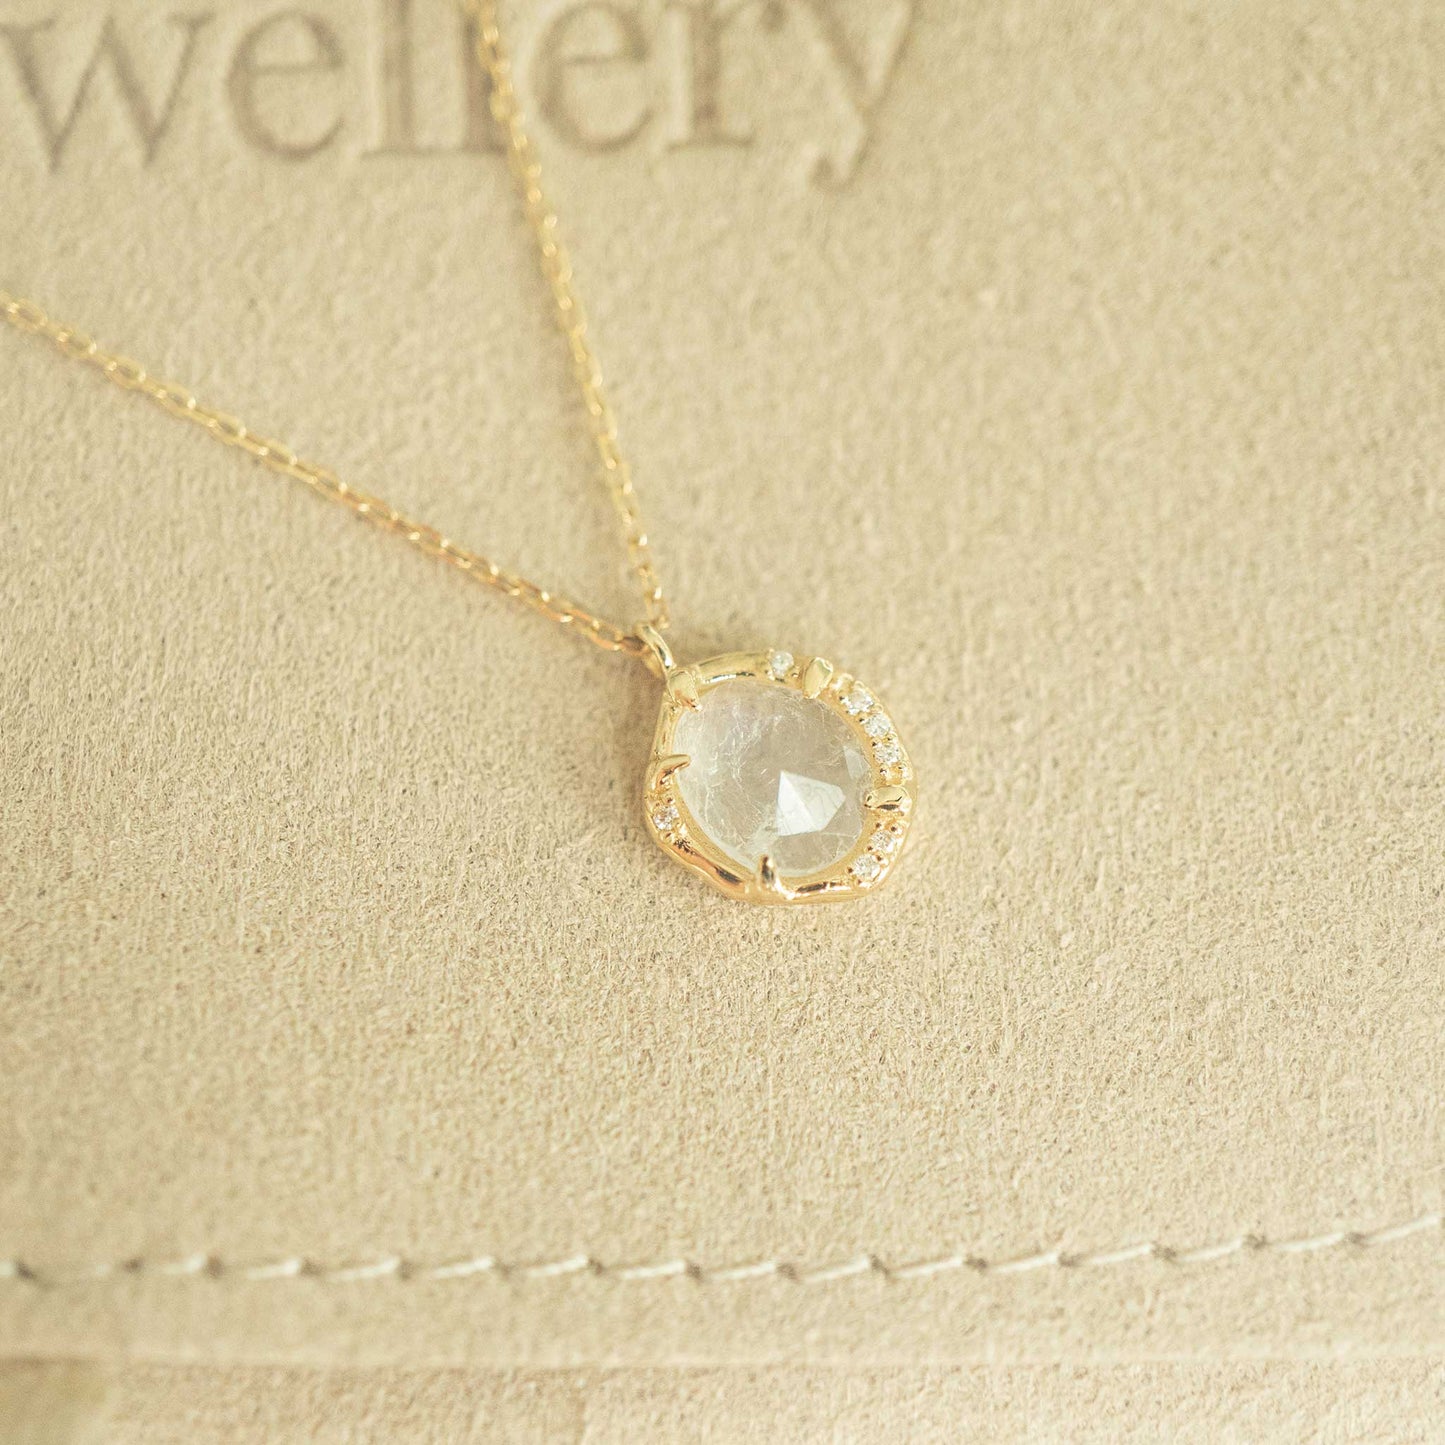 Solid Yellow Gold Moonstone Diamond Necklace